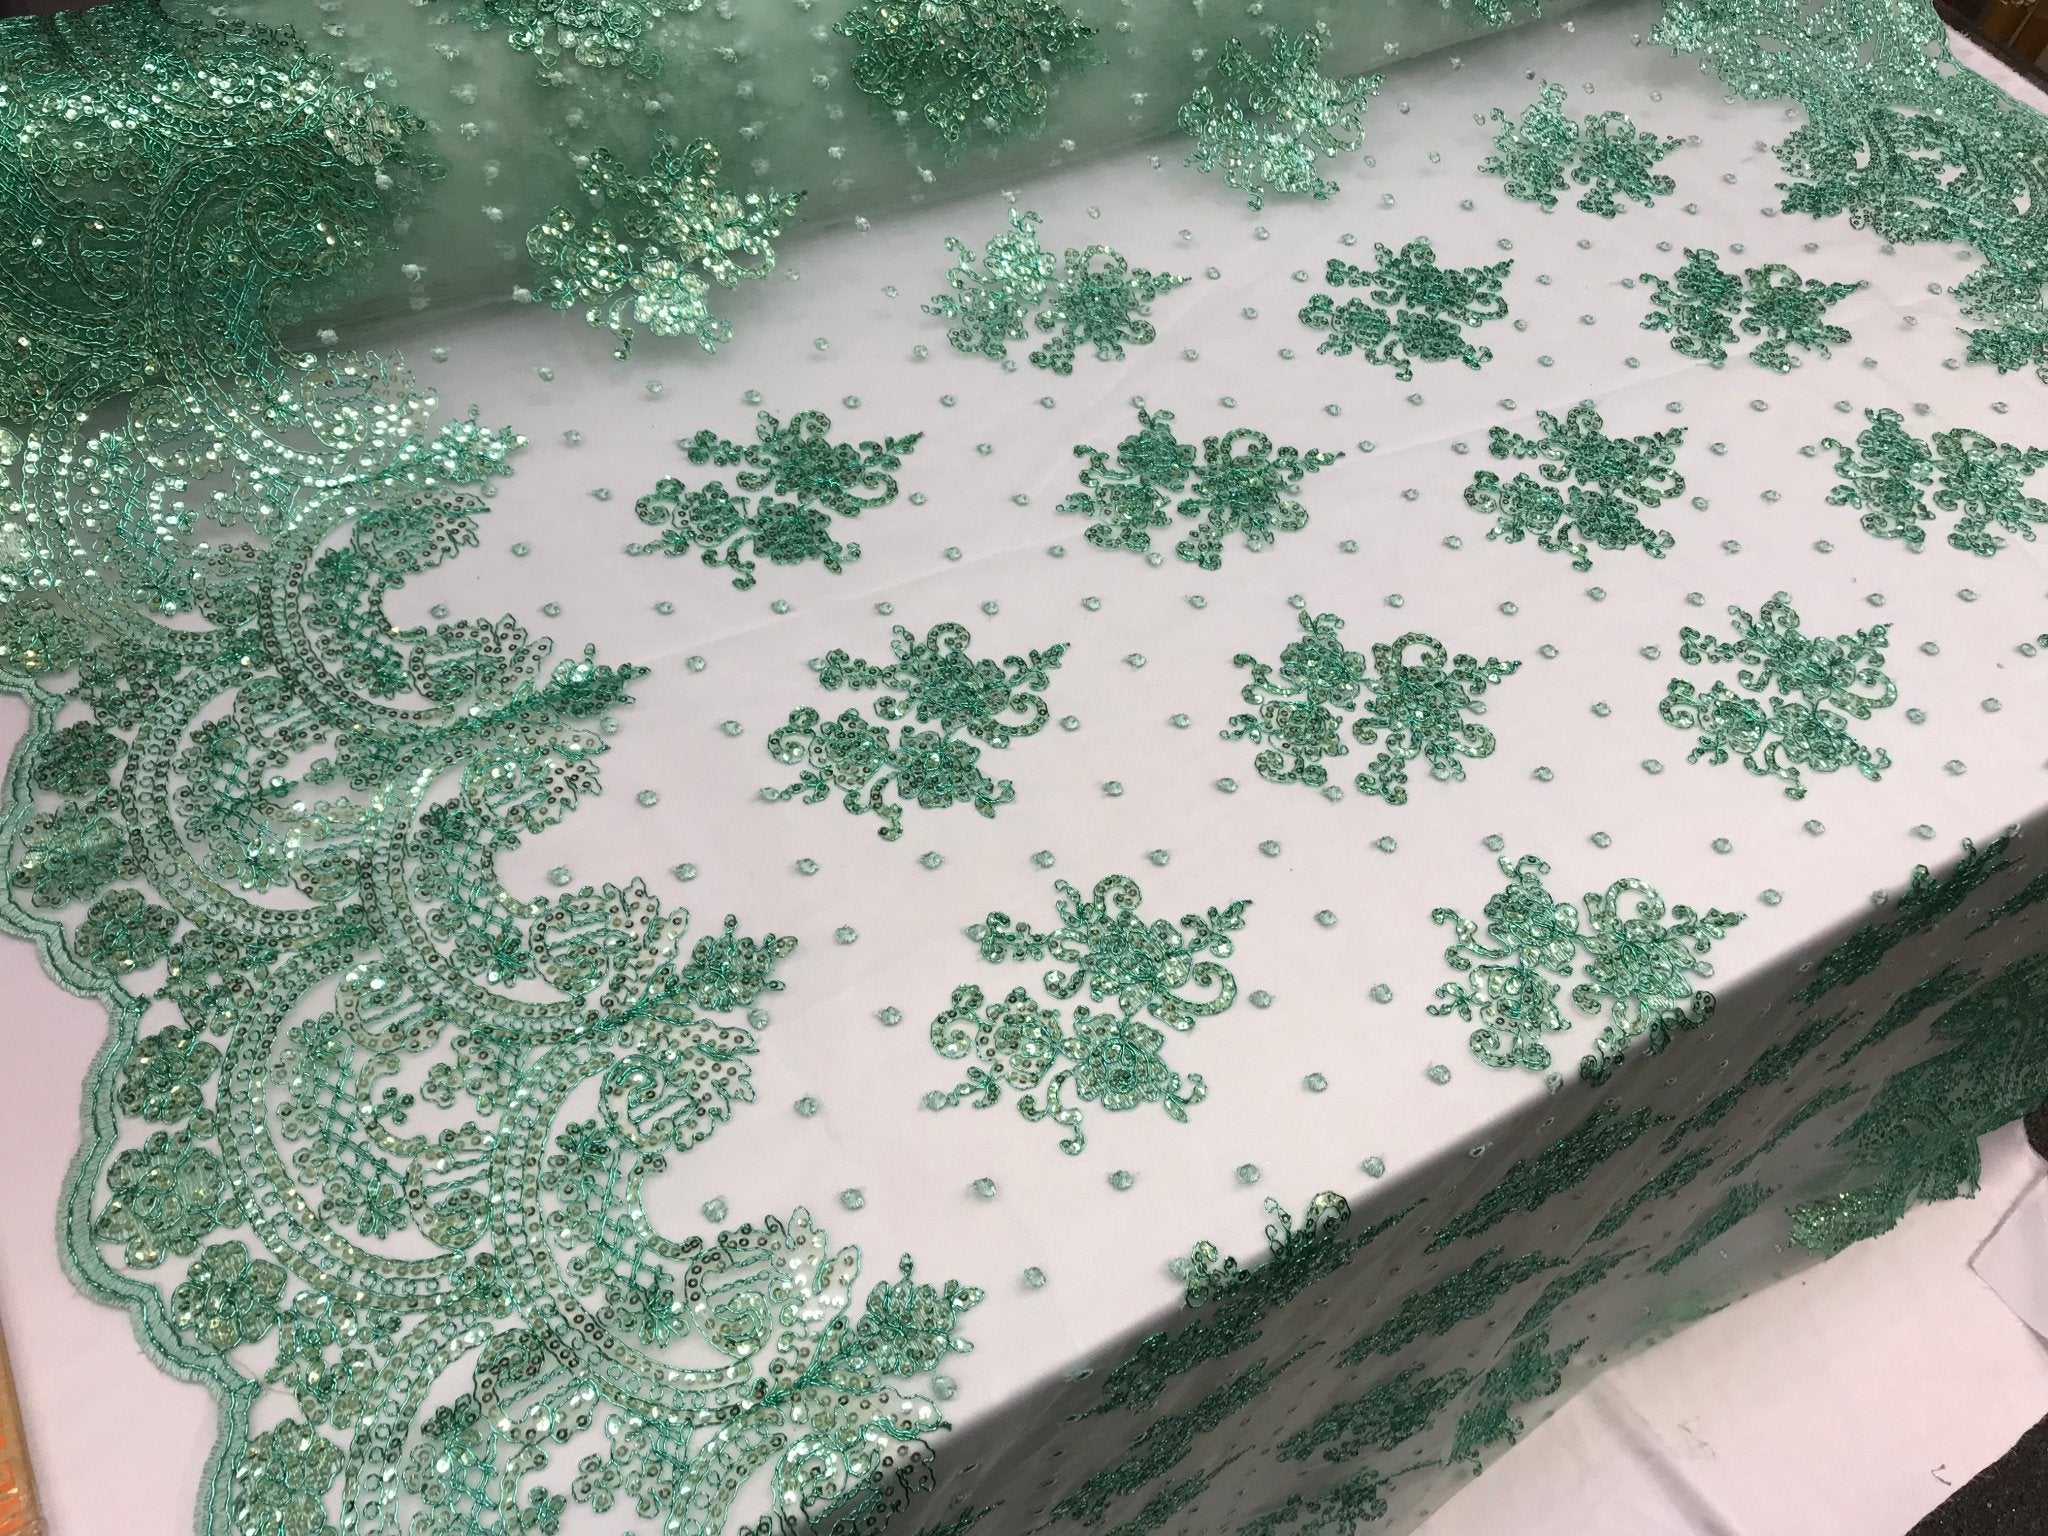 Mint Design shop prom Bridal Design transparent Fabric Mesh lace Embroidered wedding decoration night gowns tablecloths fashion dressesICE FABRICSICE FABRICSMint Design shop prom Bridal Design transparent Fabric Mesh lace Embroidered wedding decoration night gowns tablecloths fashion dresses ICE FABRICS